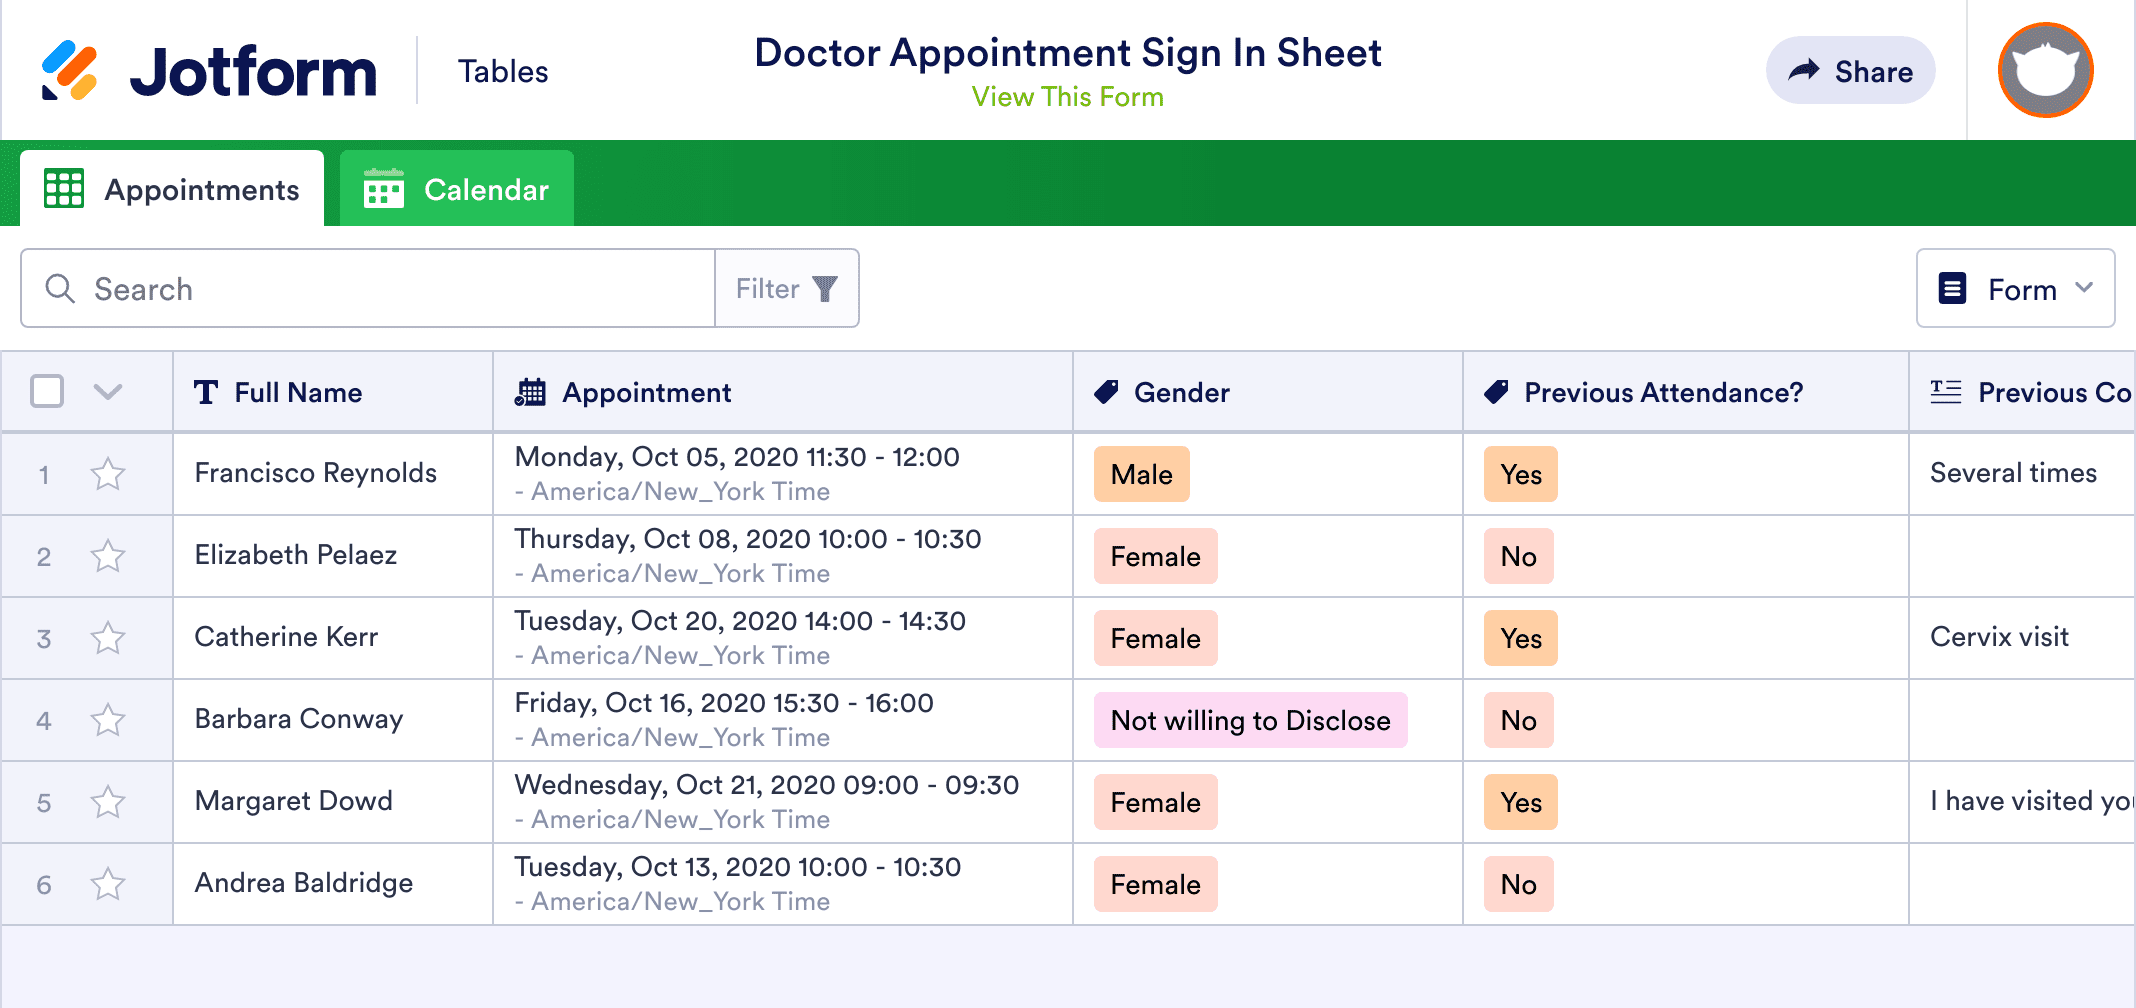 Doctor Appointment Sign In Sheet Template | Jotform Tables